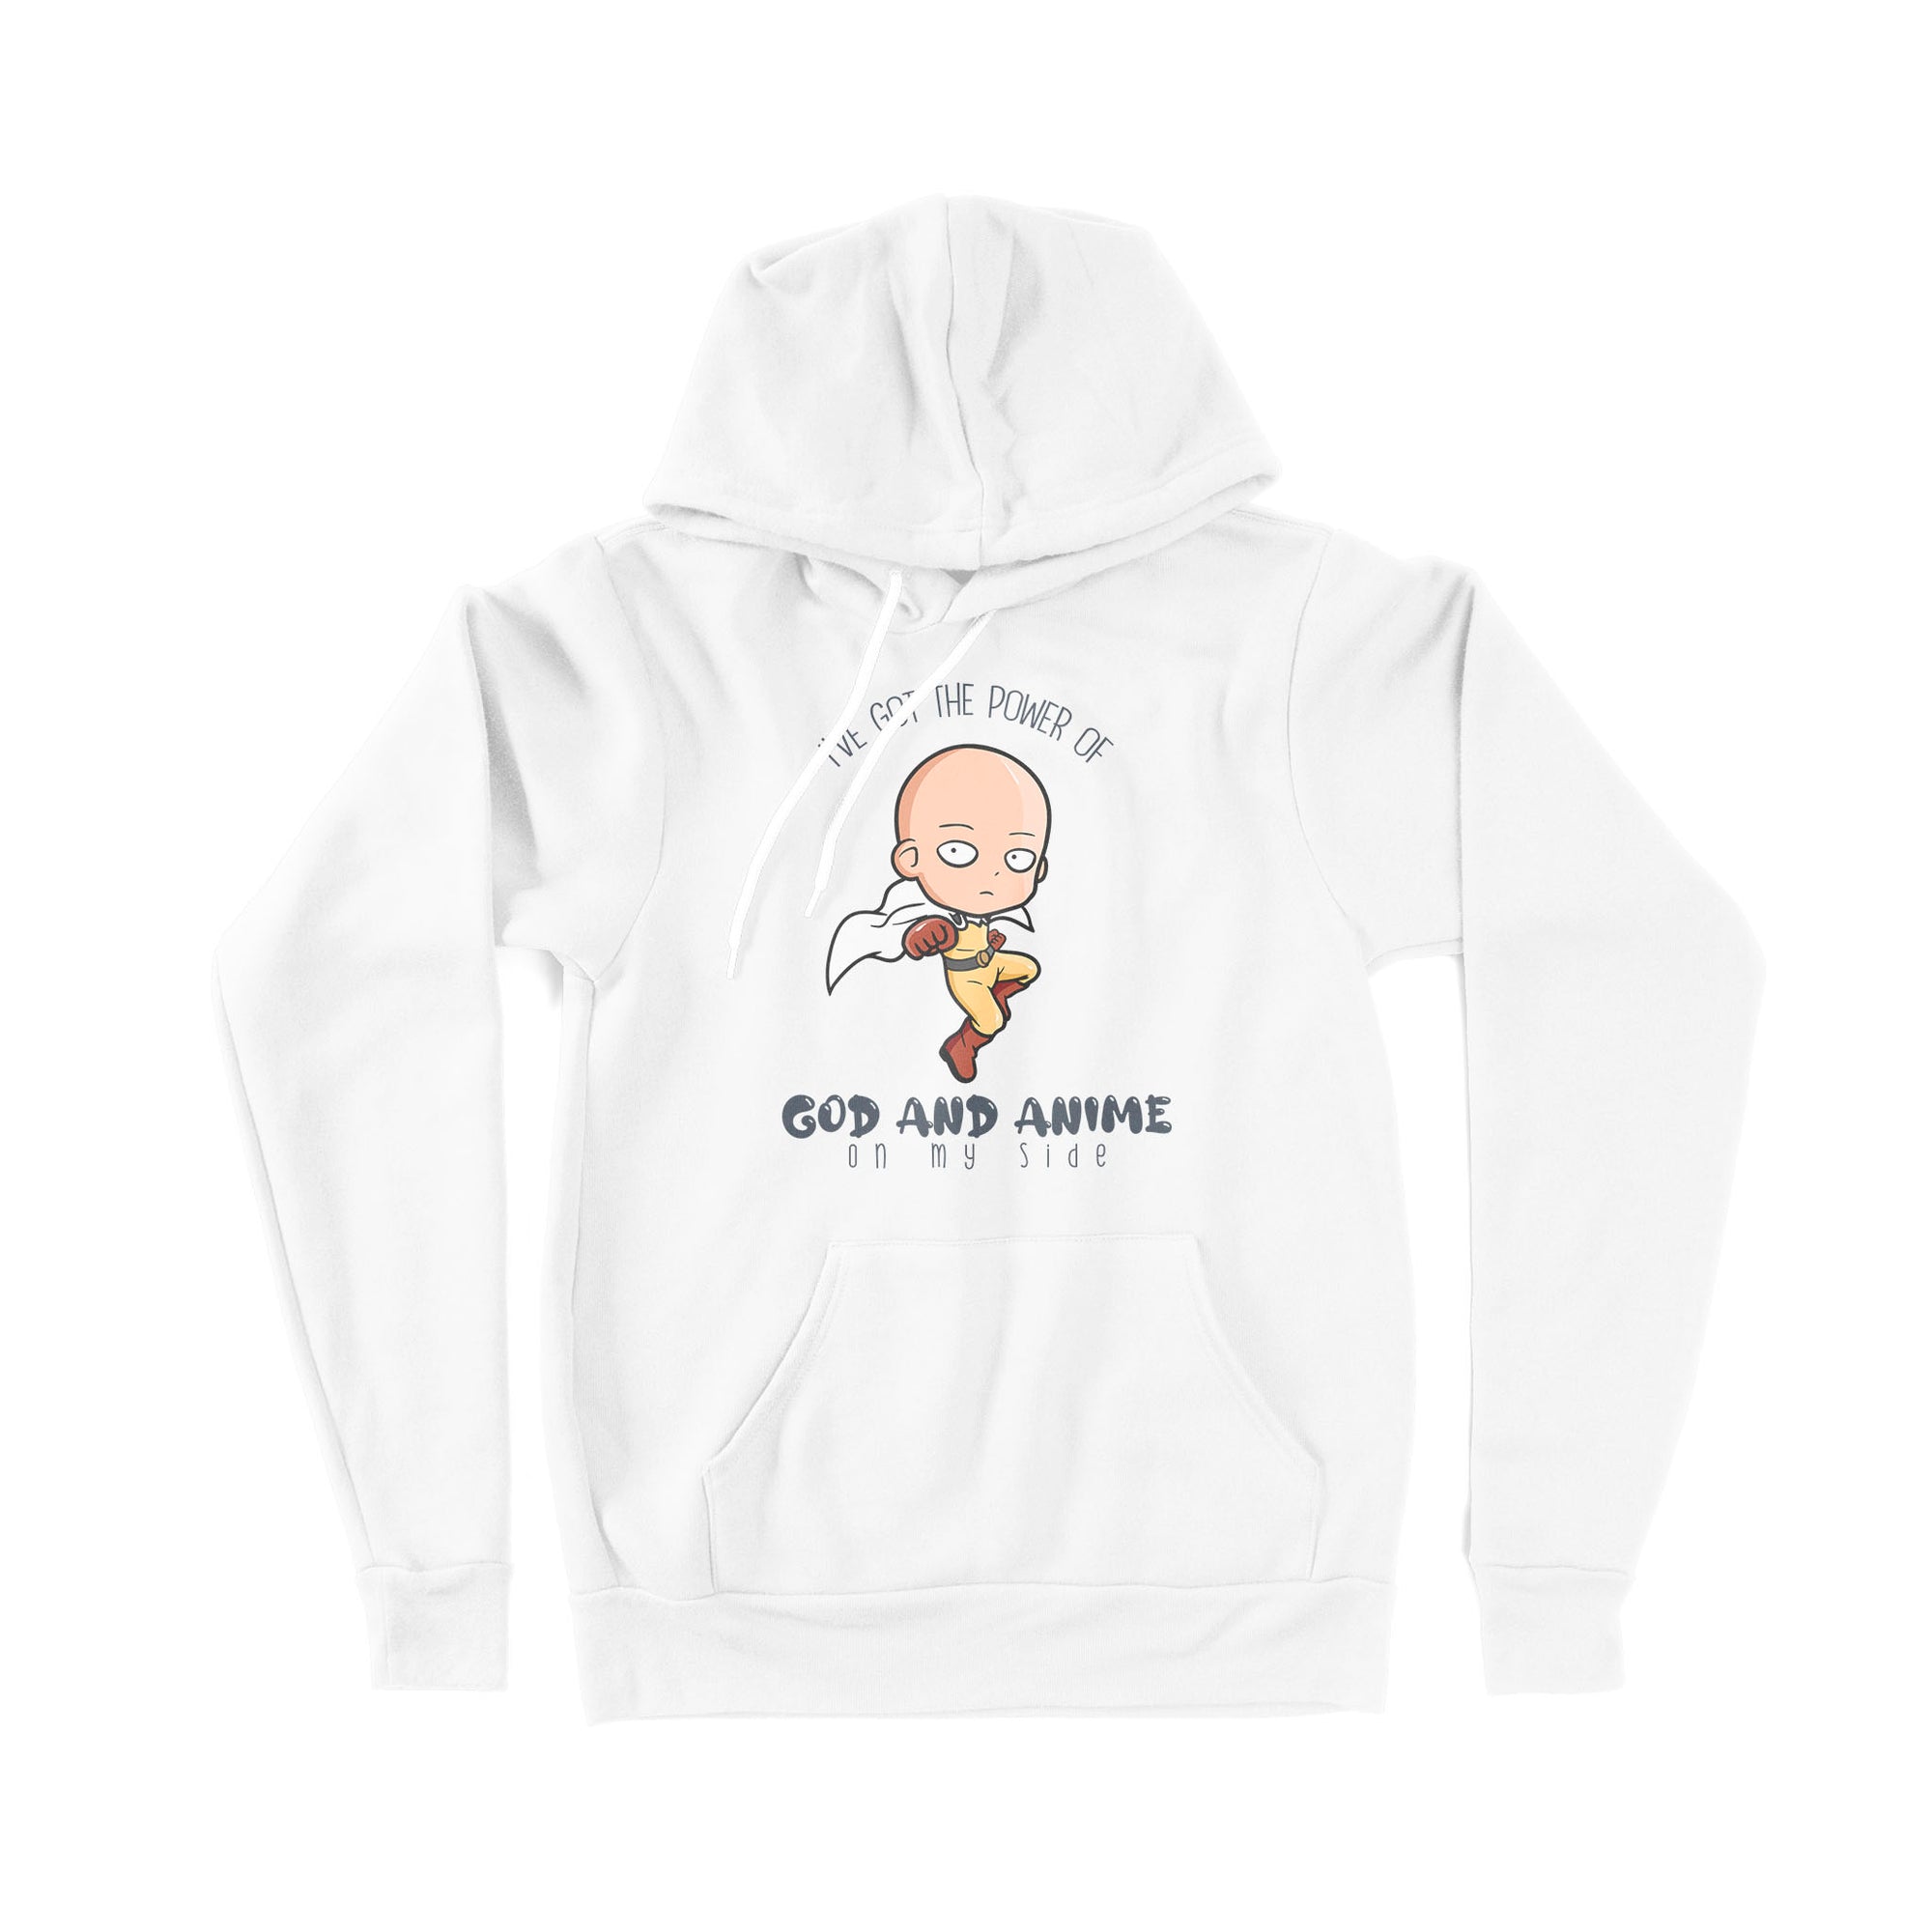 I Have The Power Of God And Anime On My Side - Premium Hoodie